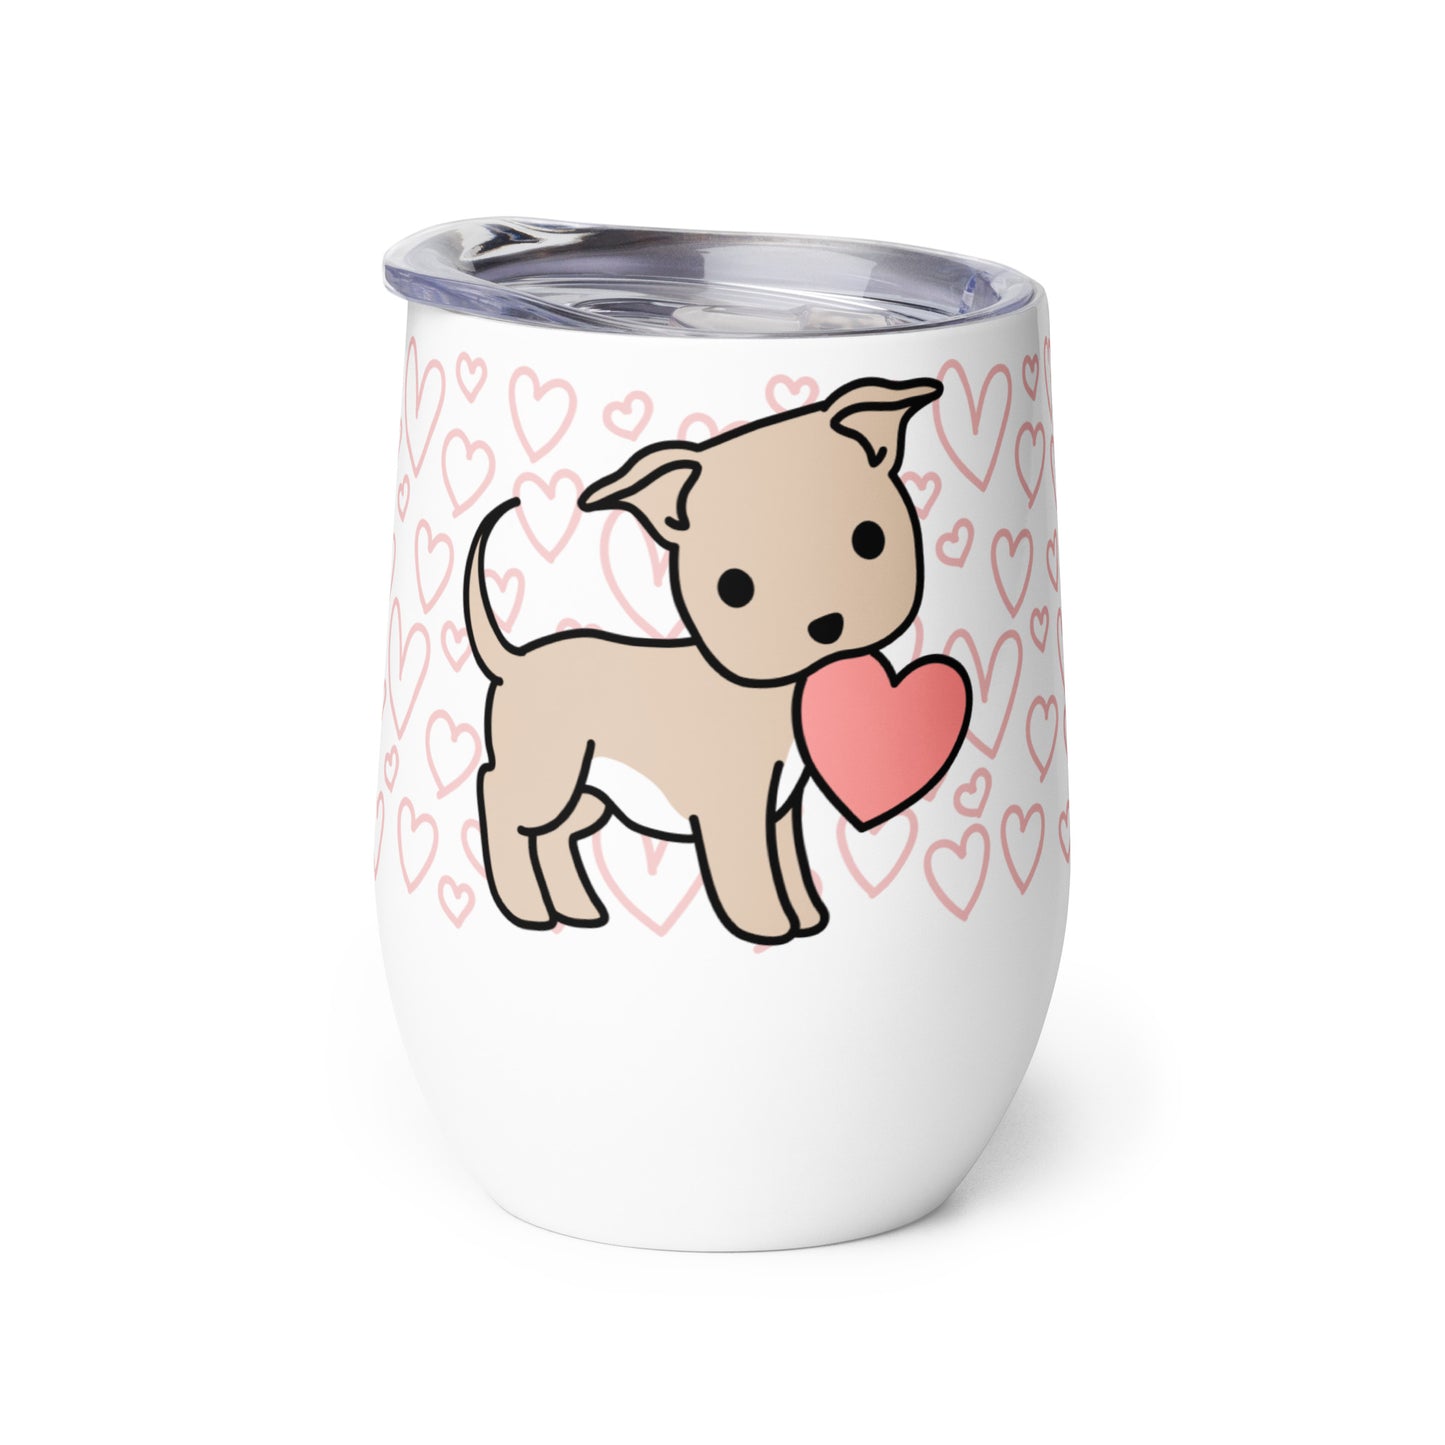 A white metal wine tumbler with a plastic lid. A pattern of hearts wraps around the top half of the tumbler. Centered on the tumbler is a cute, stylized illustration of a Pit Bull